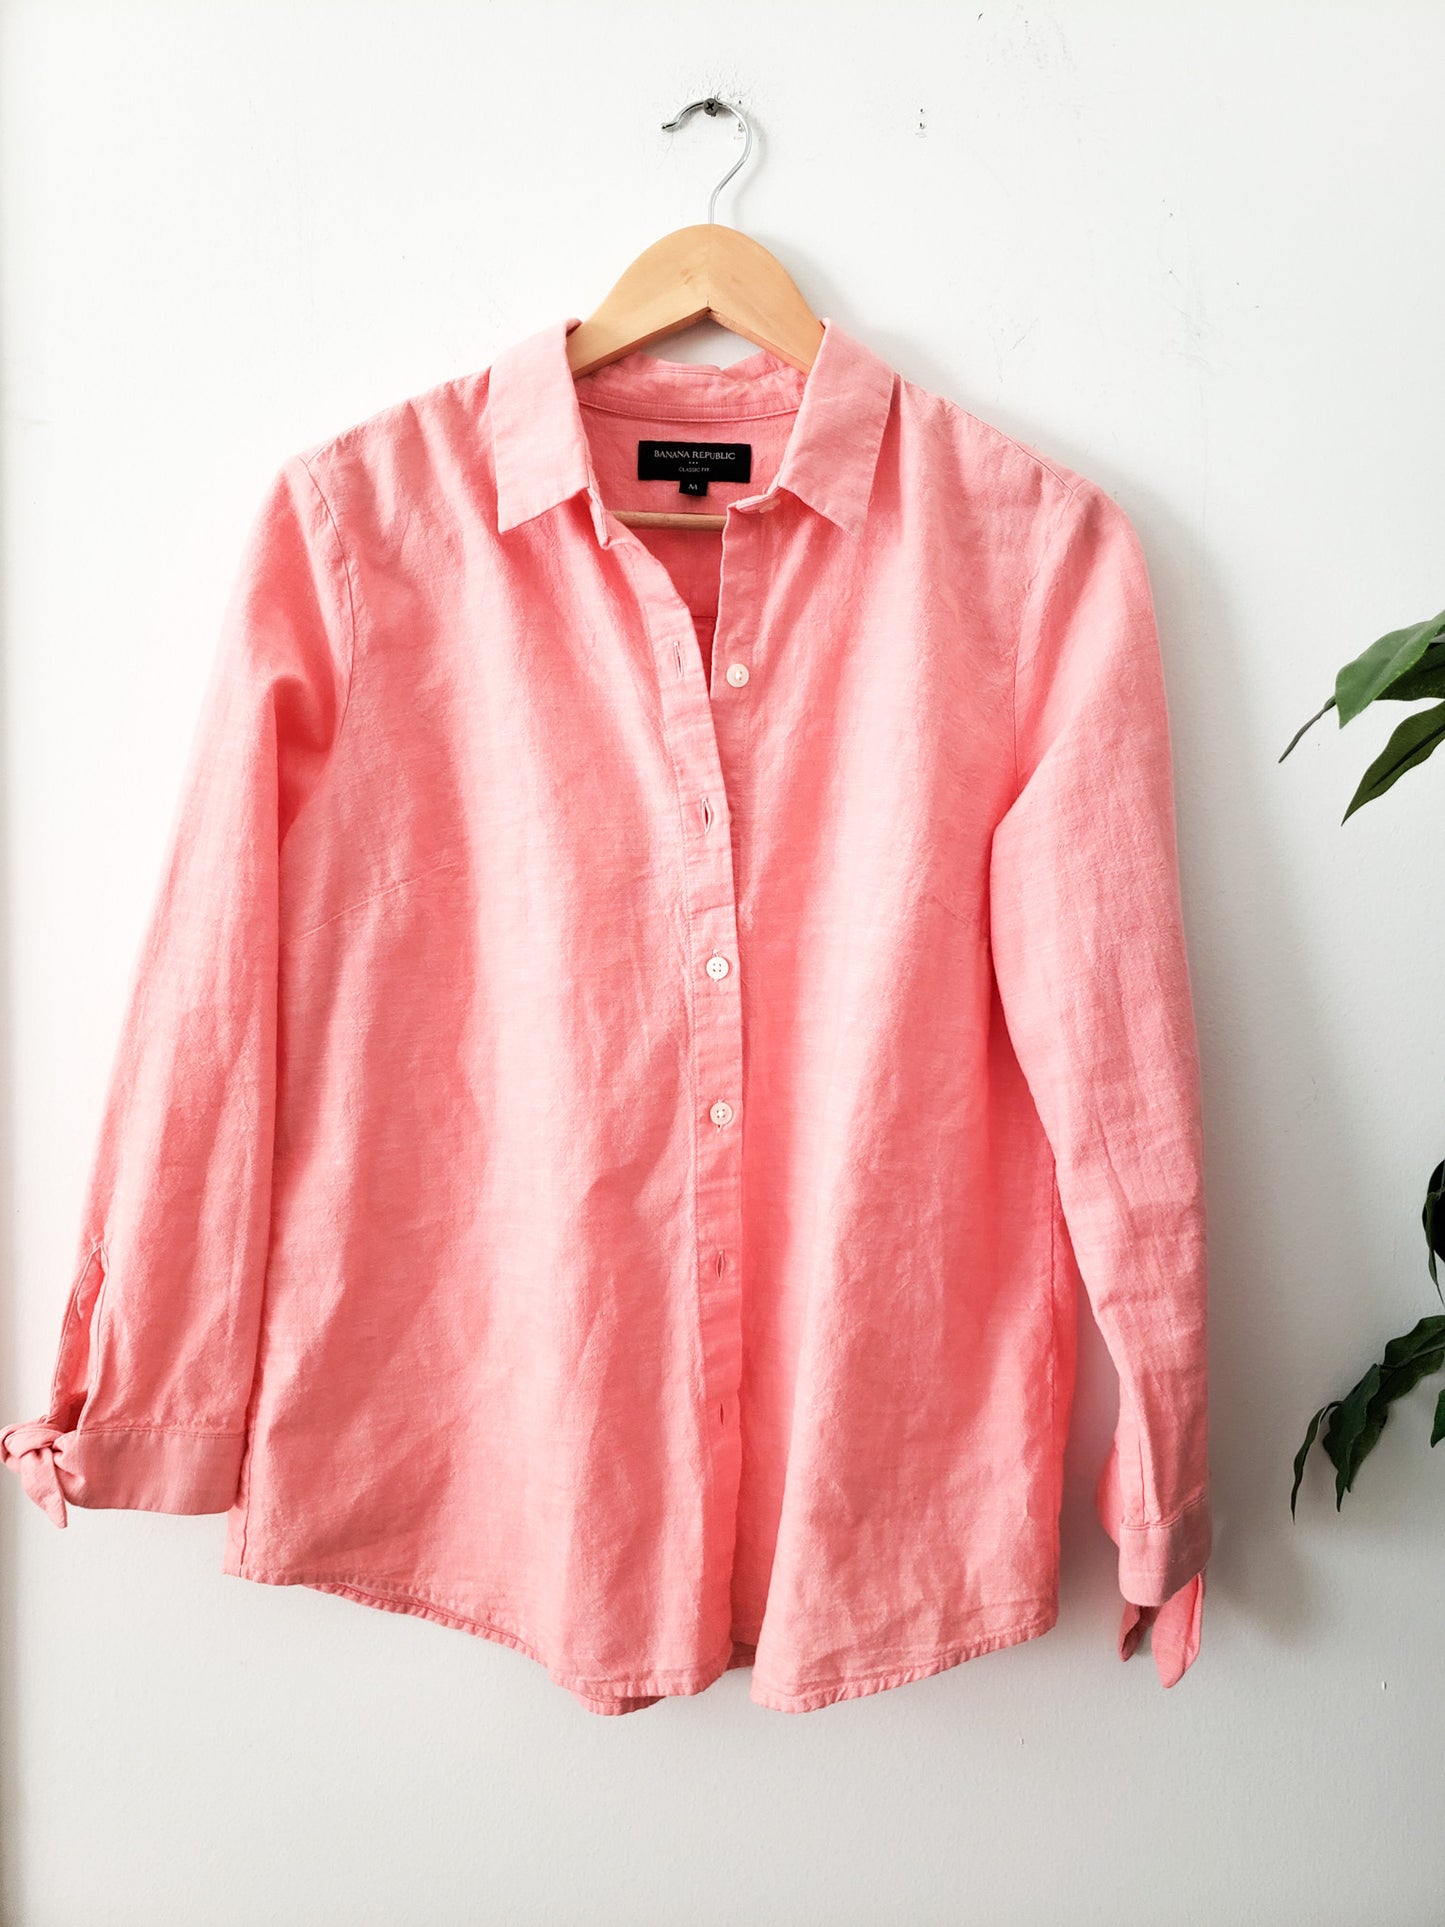 BANANA REPUBLIC CORAL CLASSIC FIT BUTTON UP SIZE MEDIUM